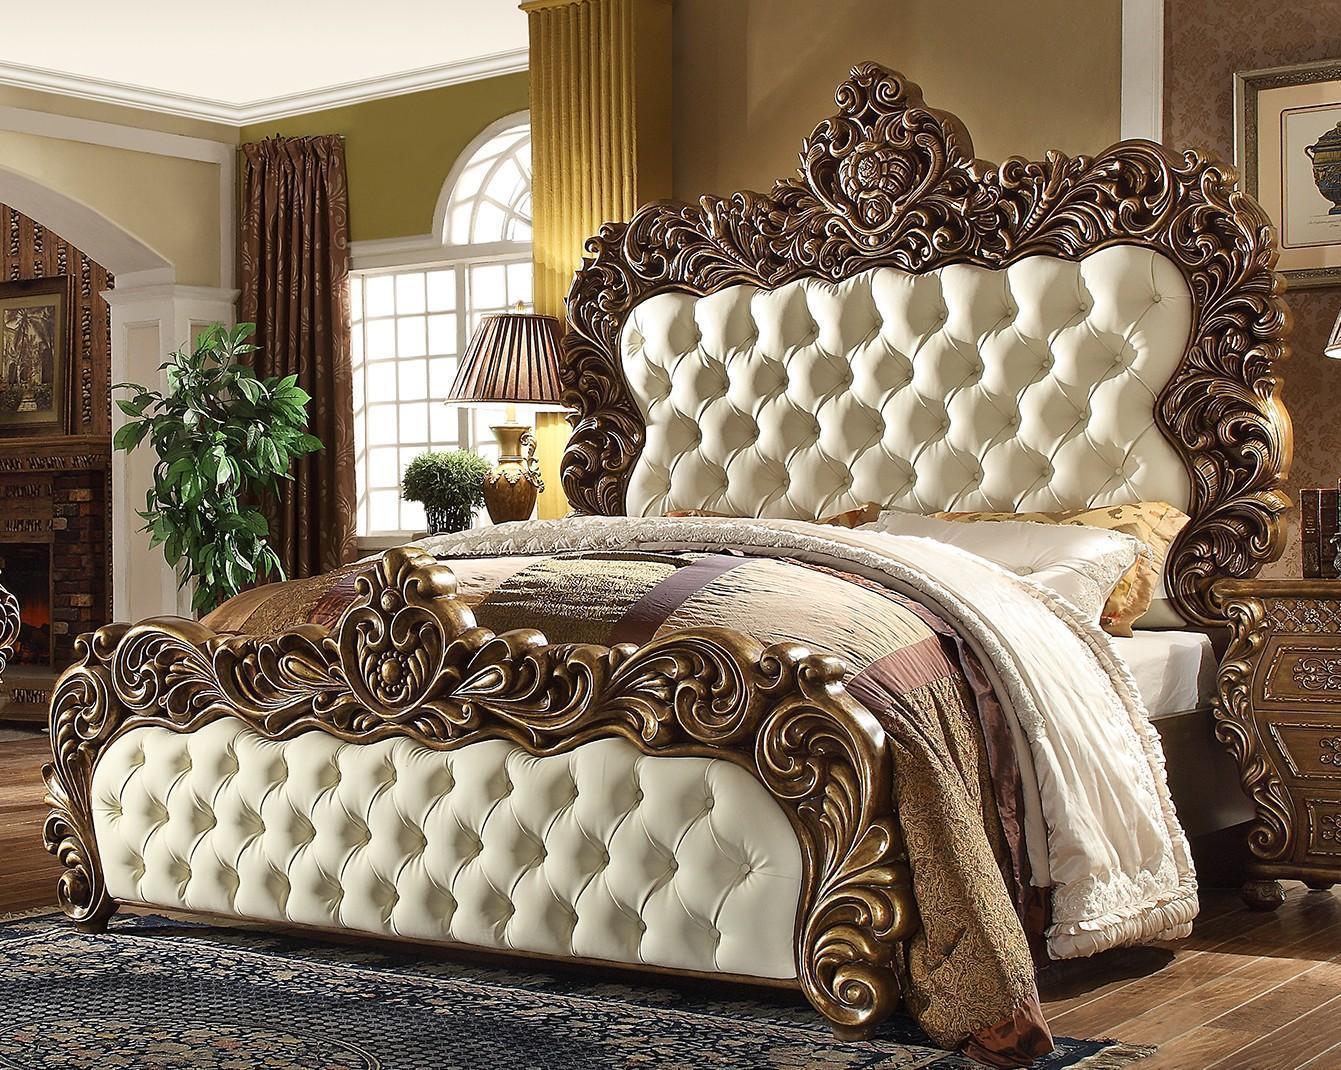 Traditional Panel Bed HD-8011 HD-8011 EK BED in Golden Brown Leather